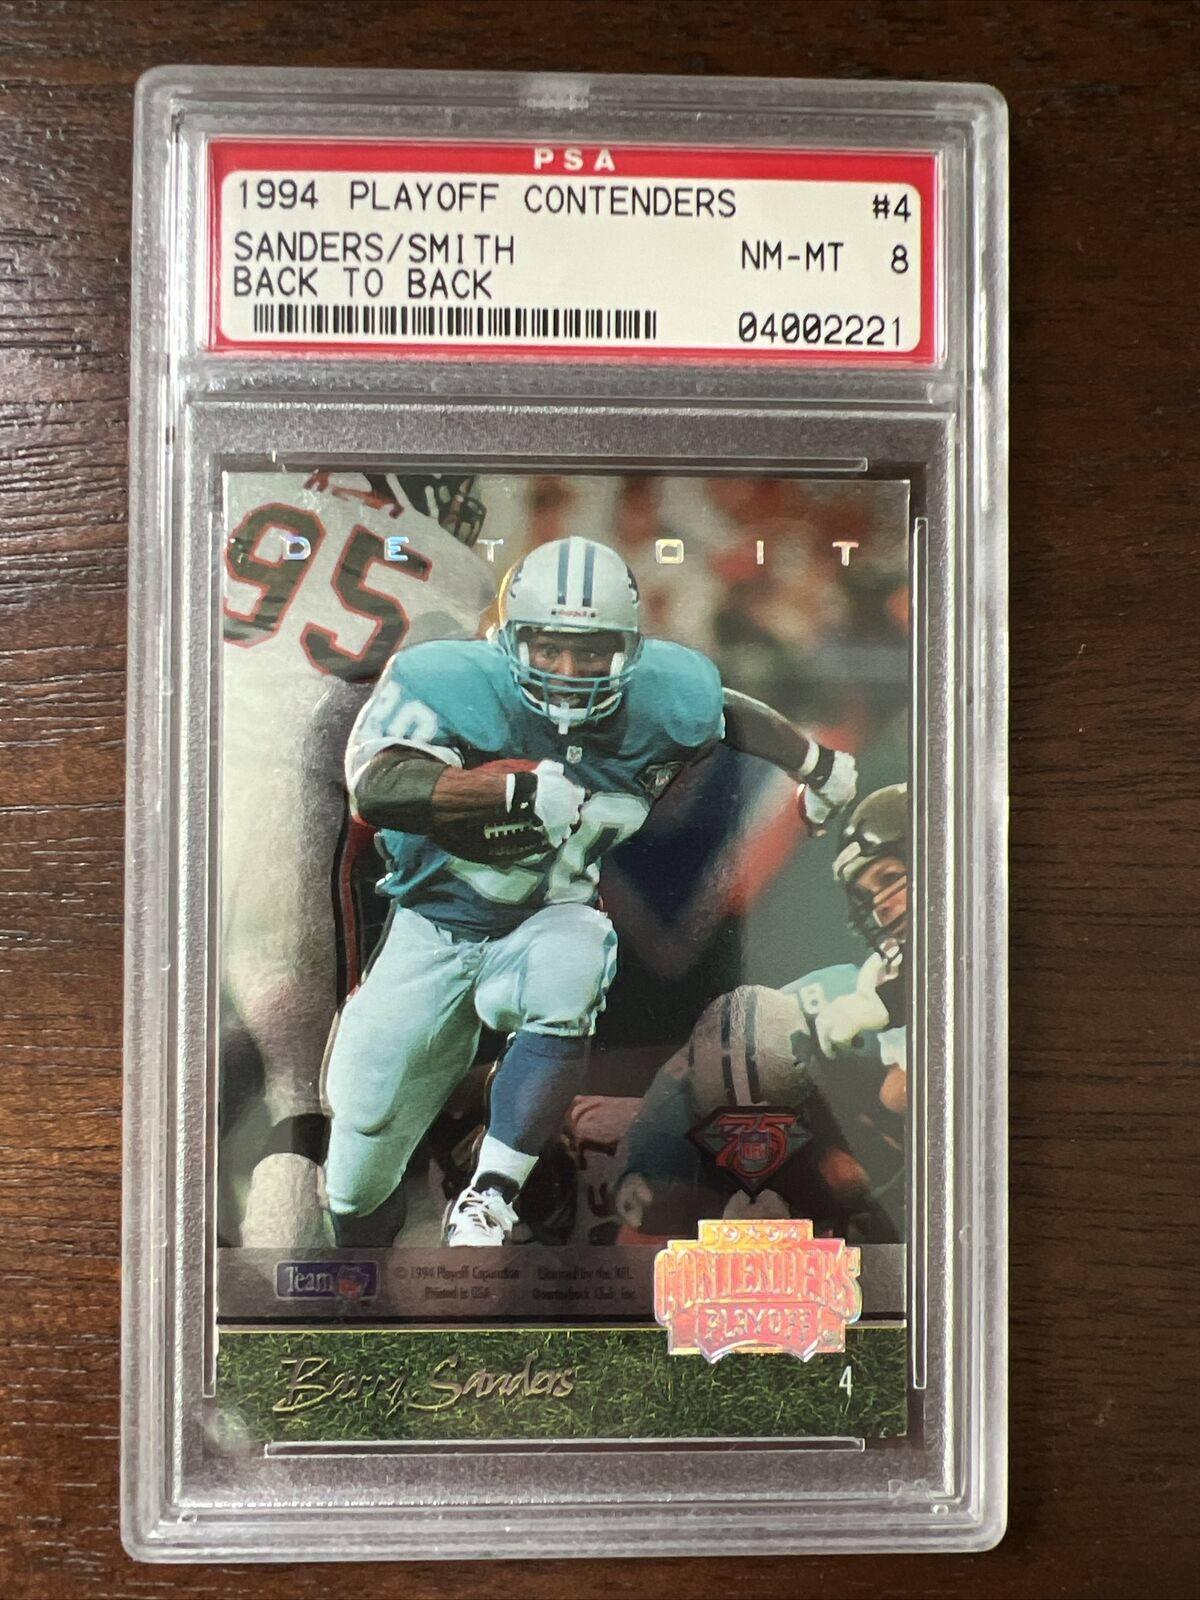 SCARCE 1994 Playoff Contenders Barry Sanders Emmitt Smith Back to Back #4 PSA 8